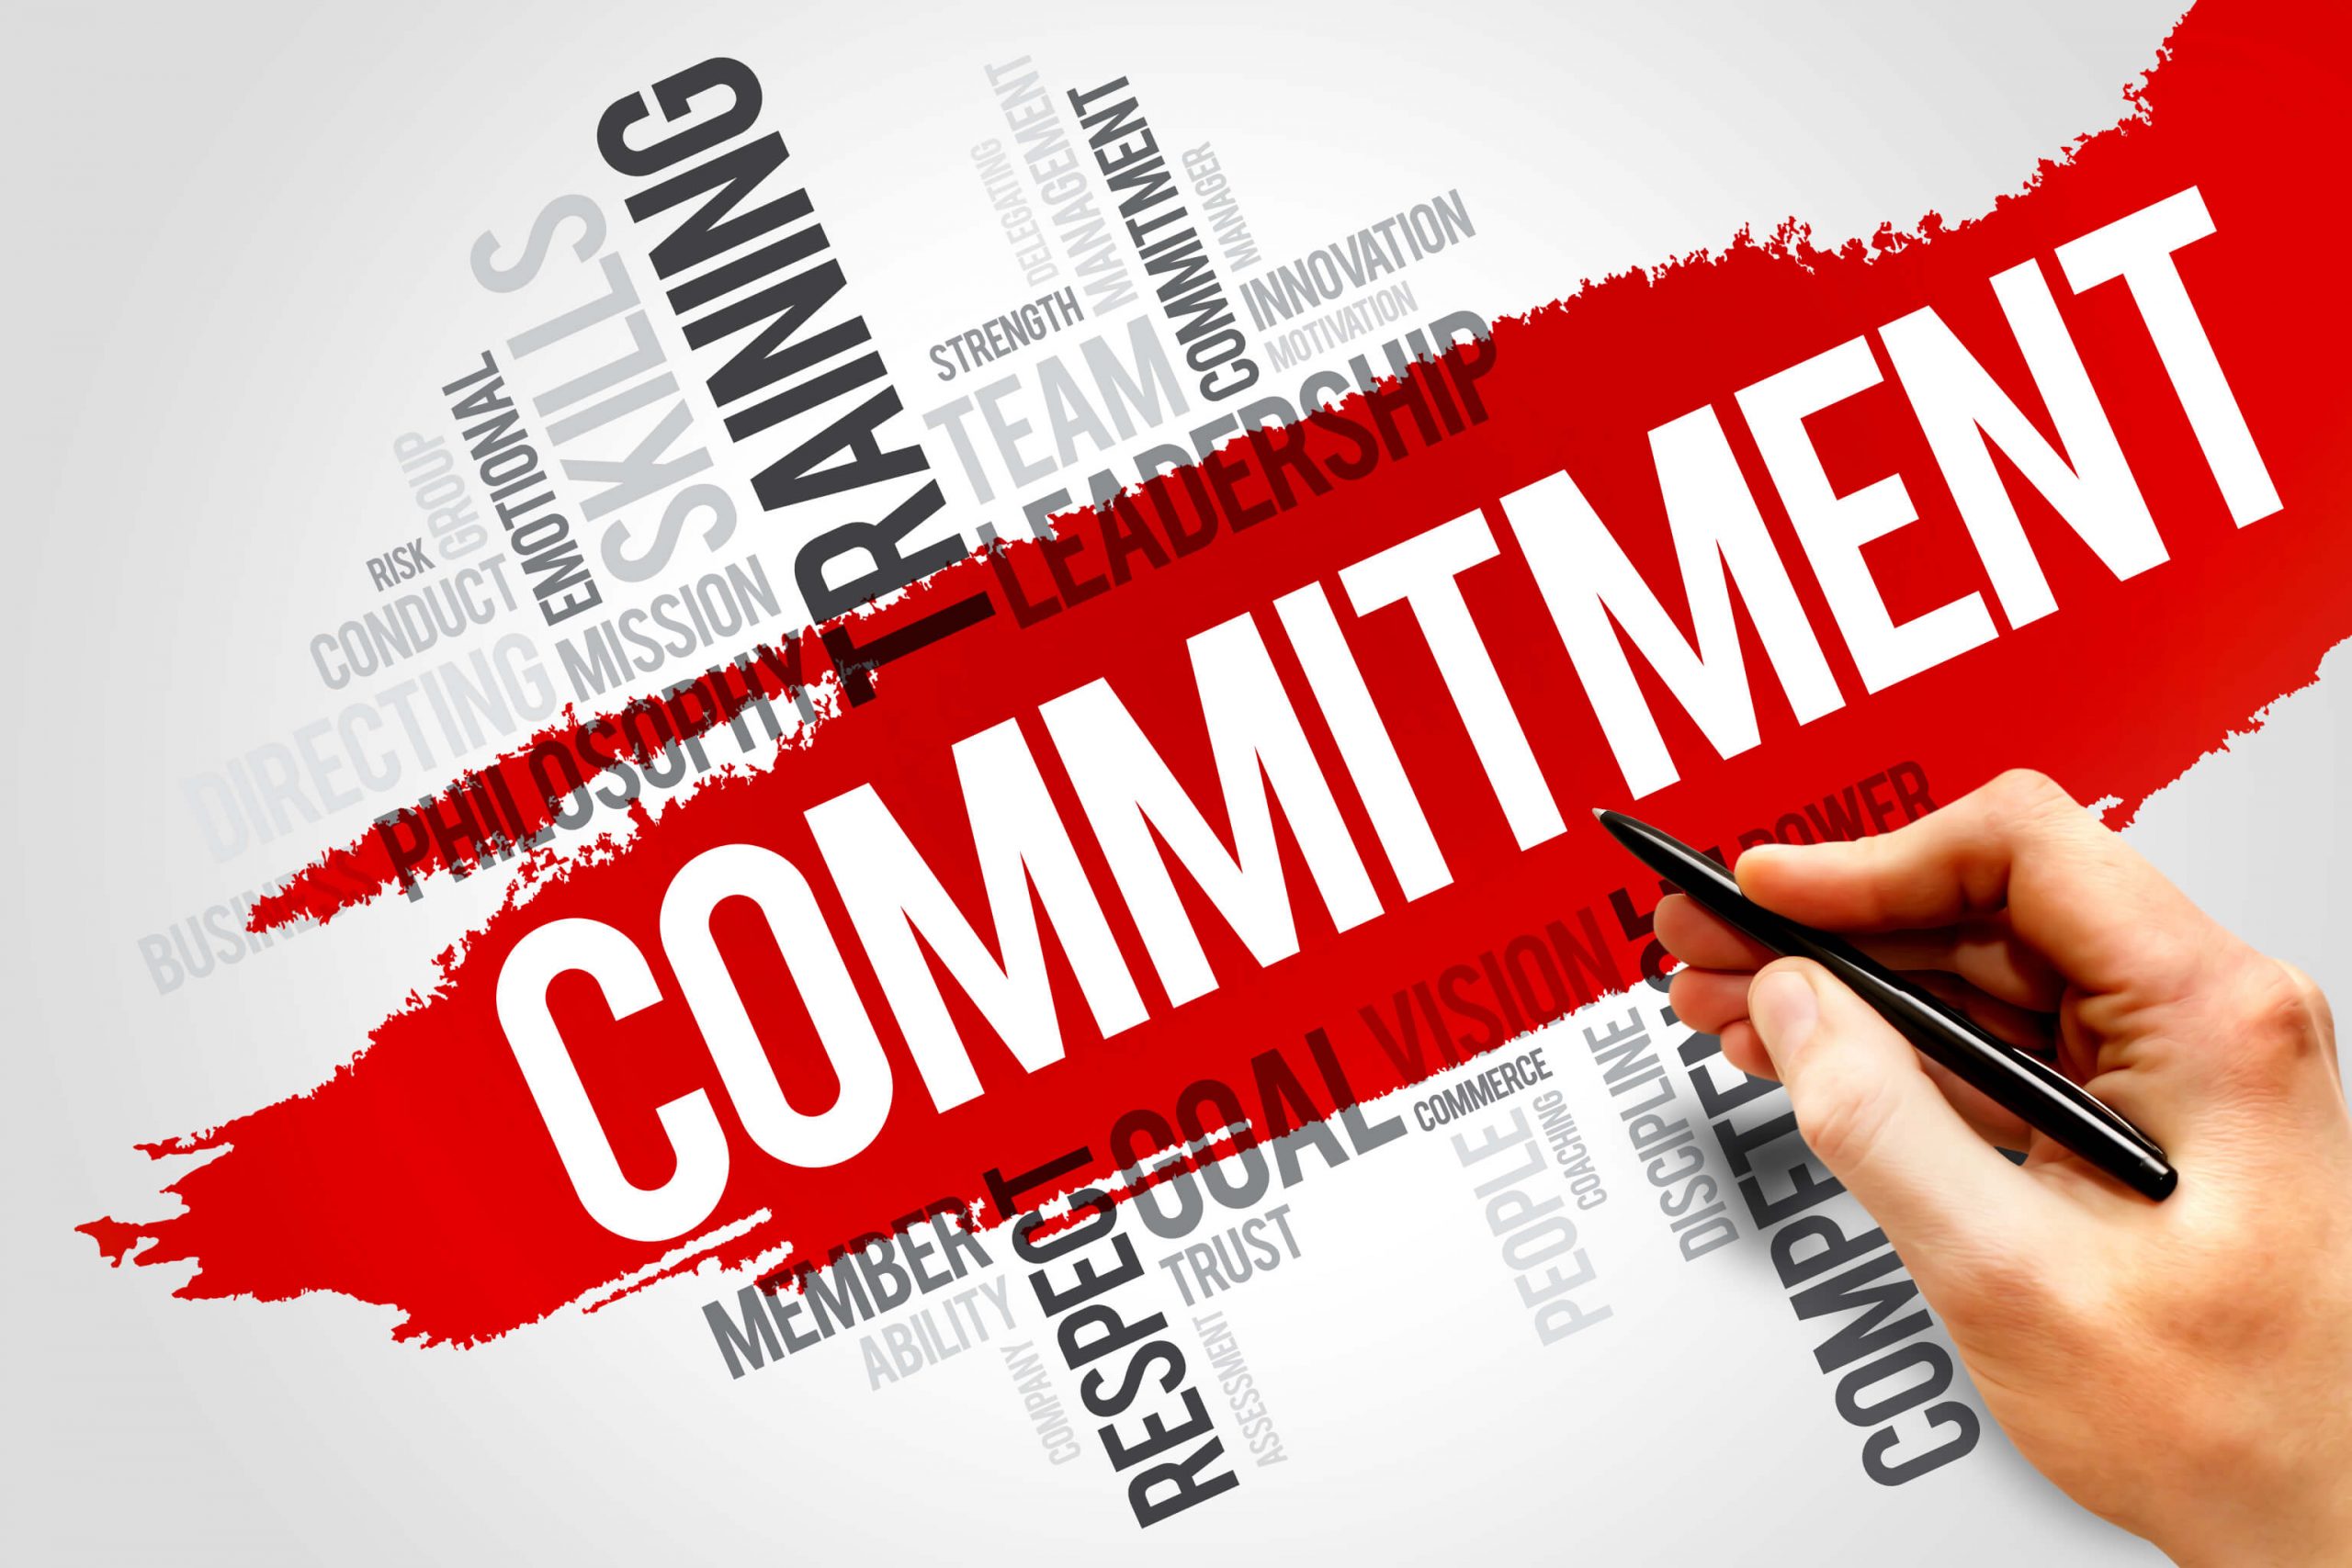 Image result for Commitment